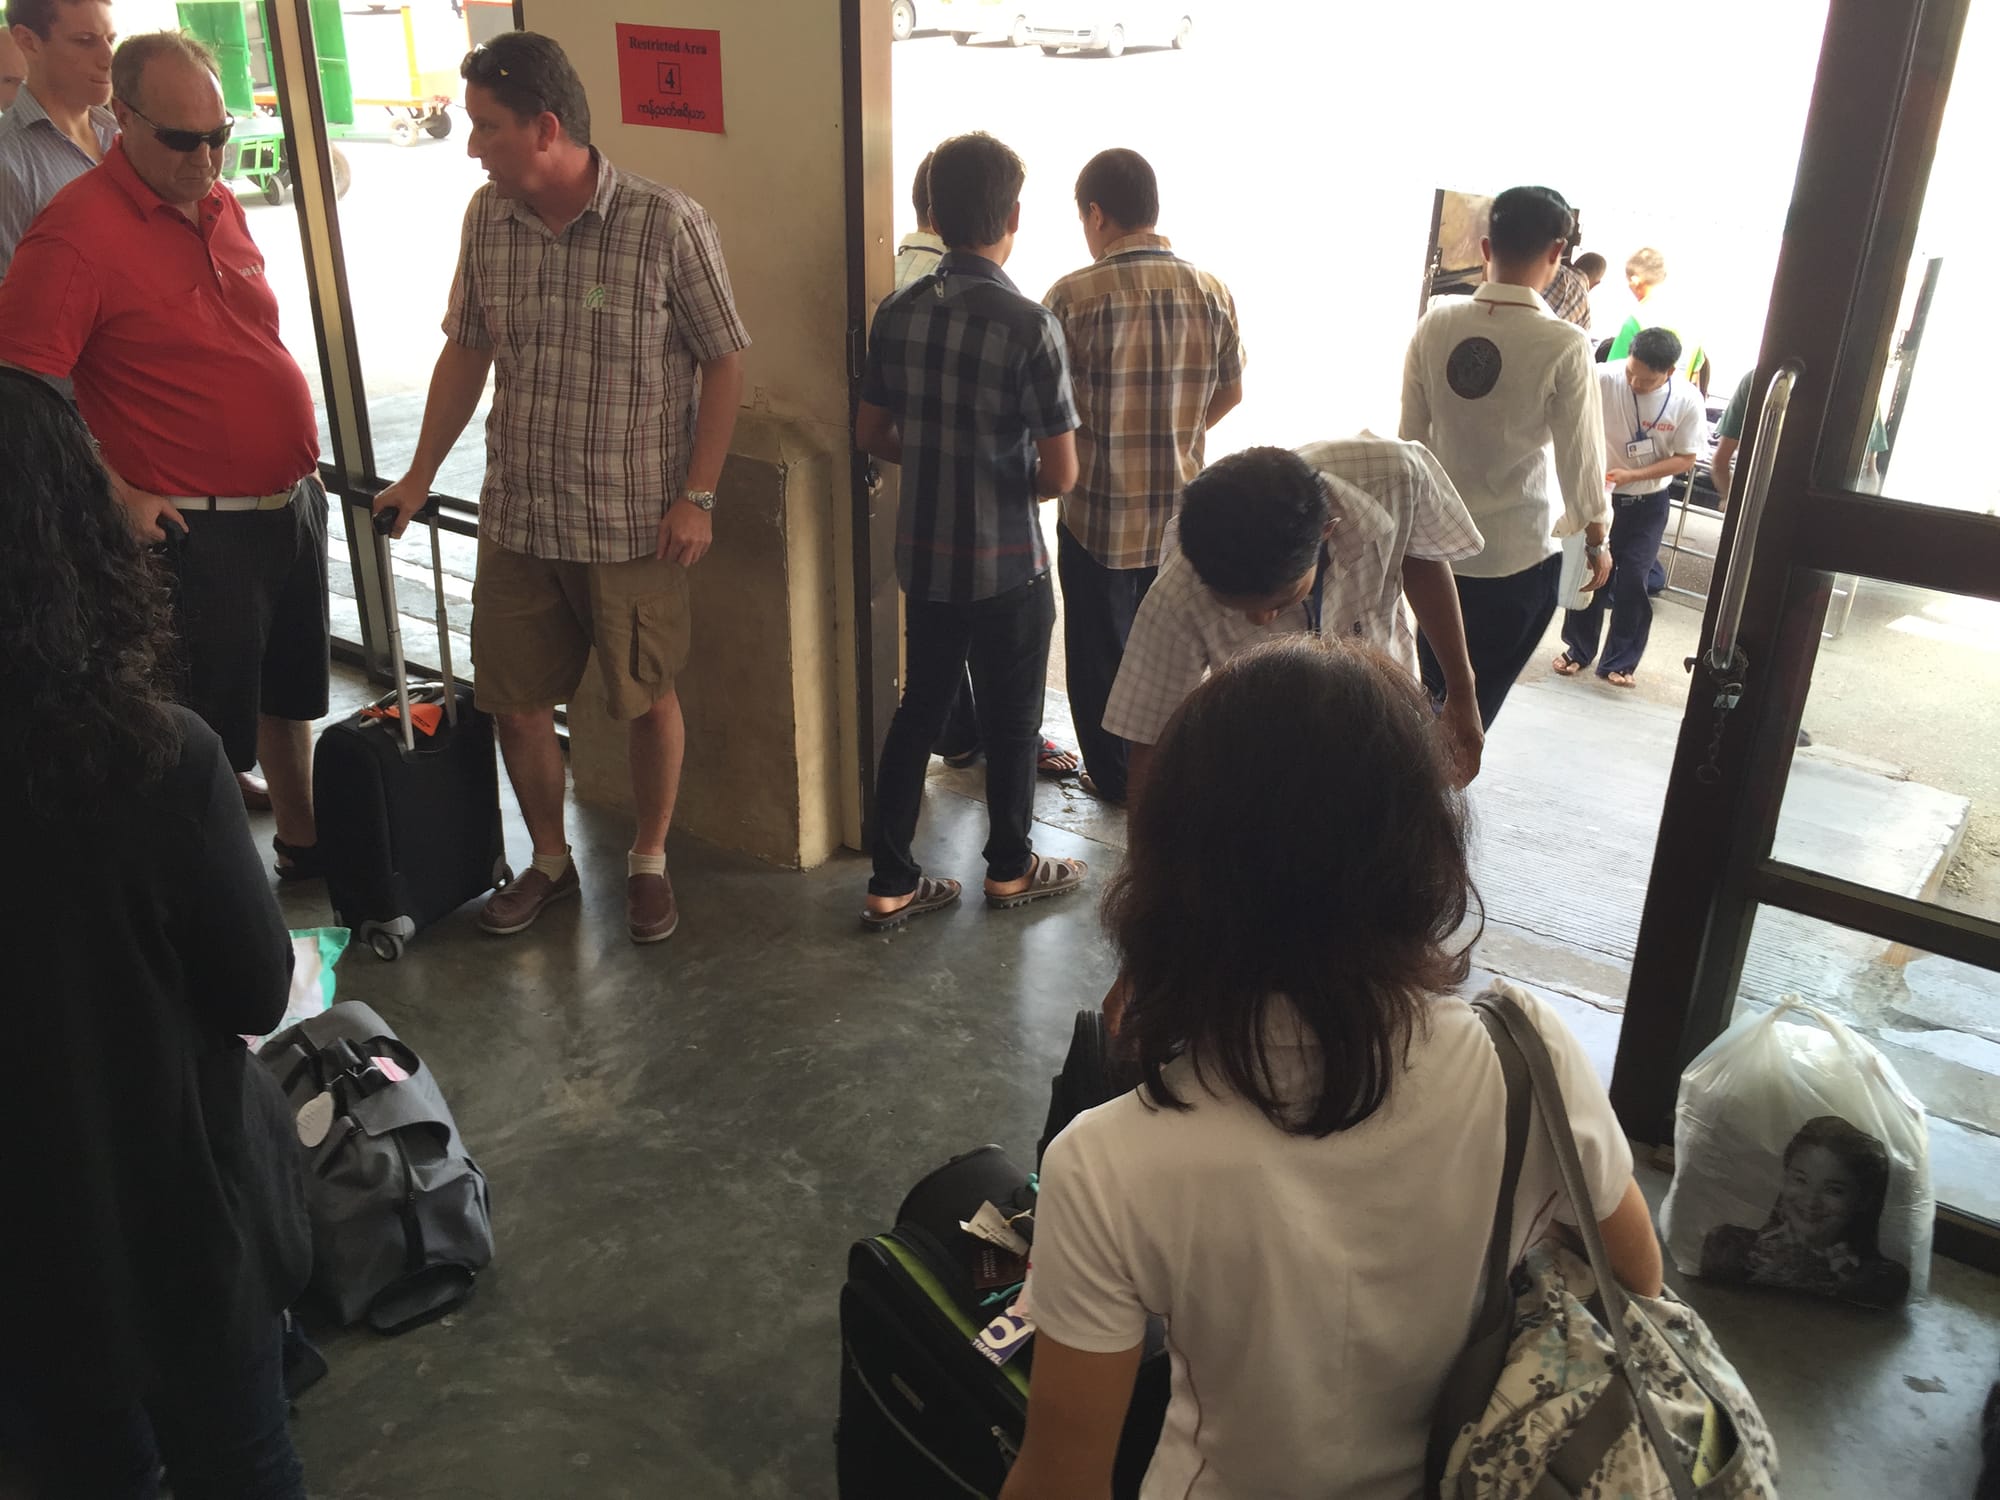 Photo by Author — getting your bags at the Domestic Terminal, Yangon (Rangoon) Airport